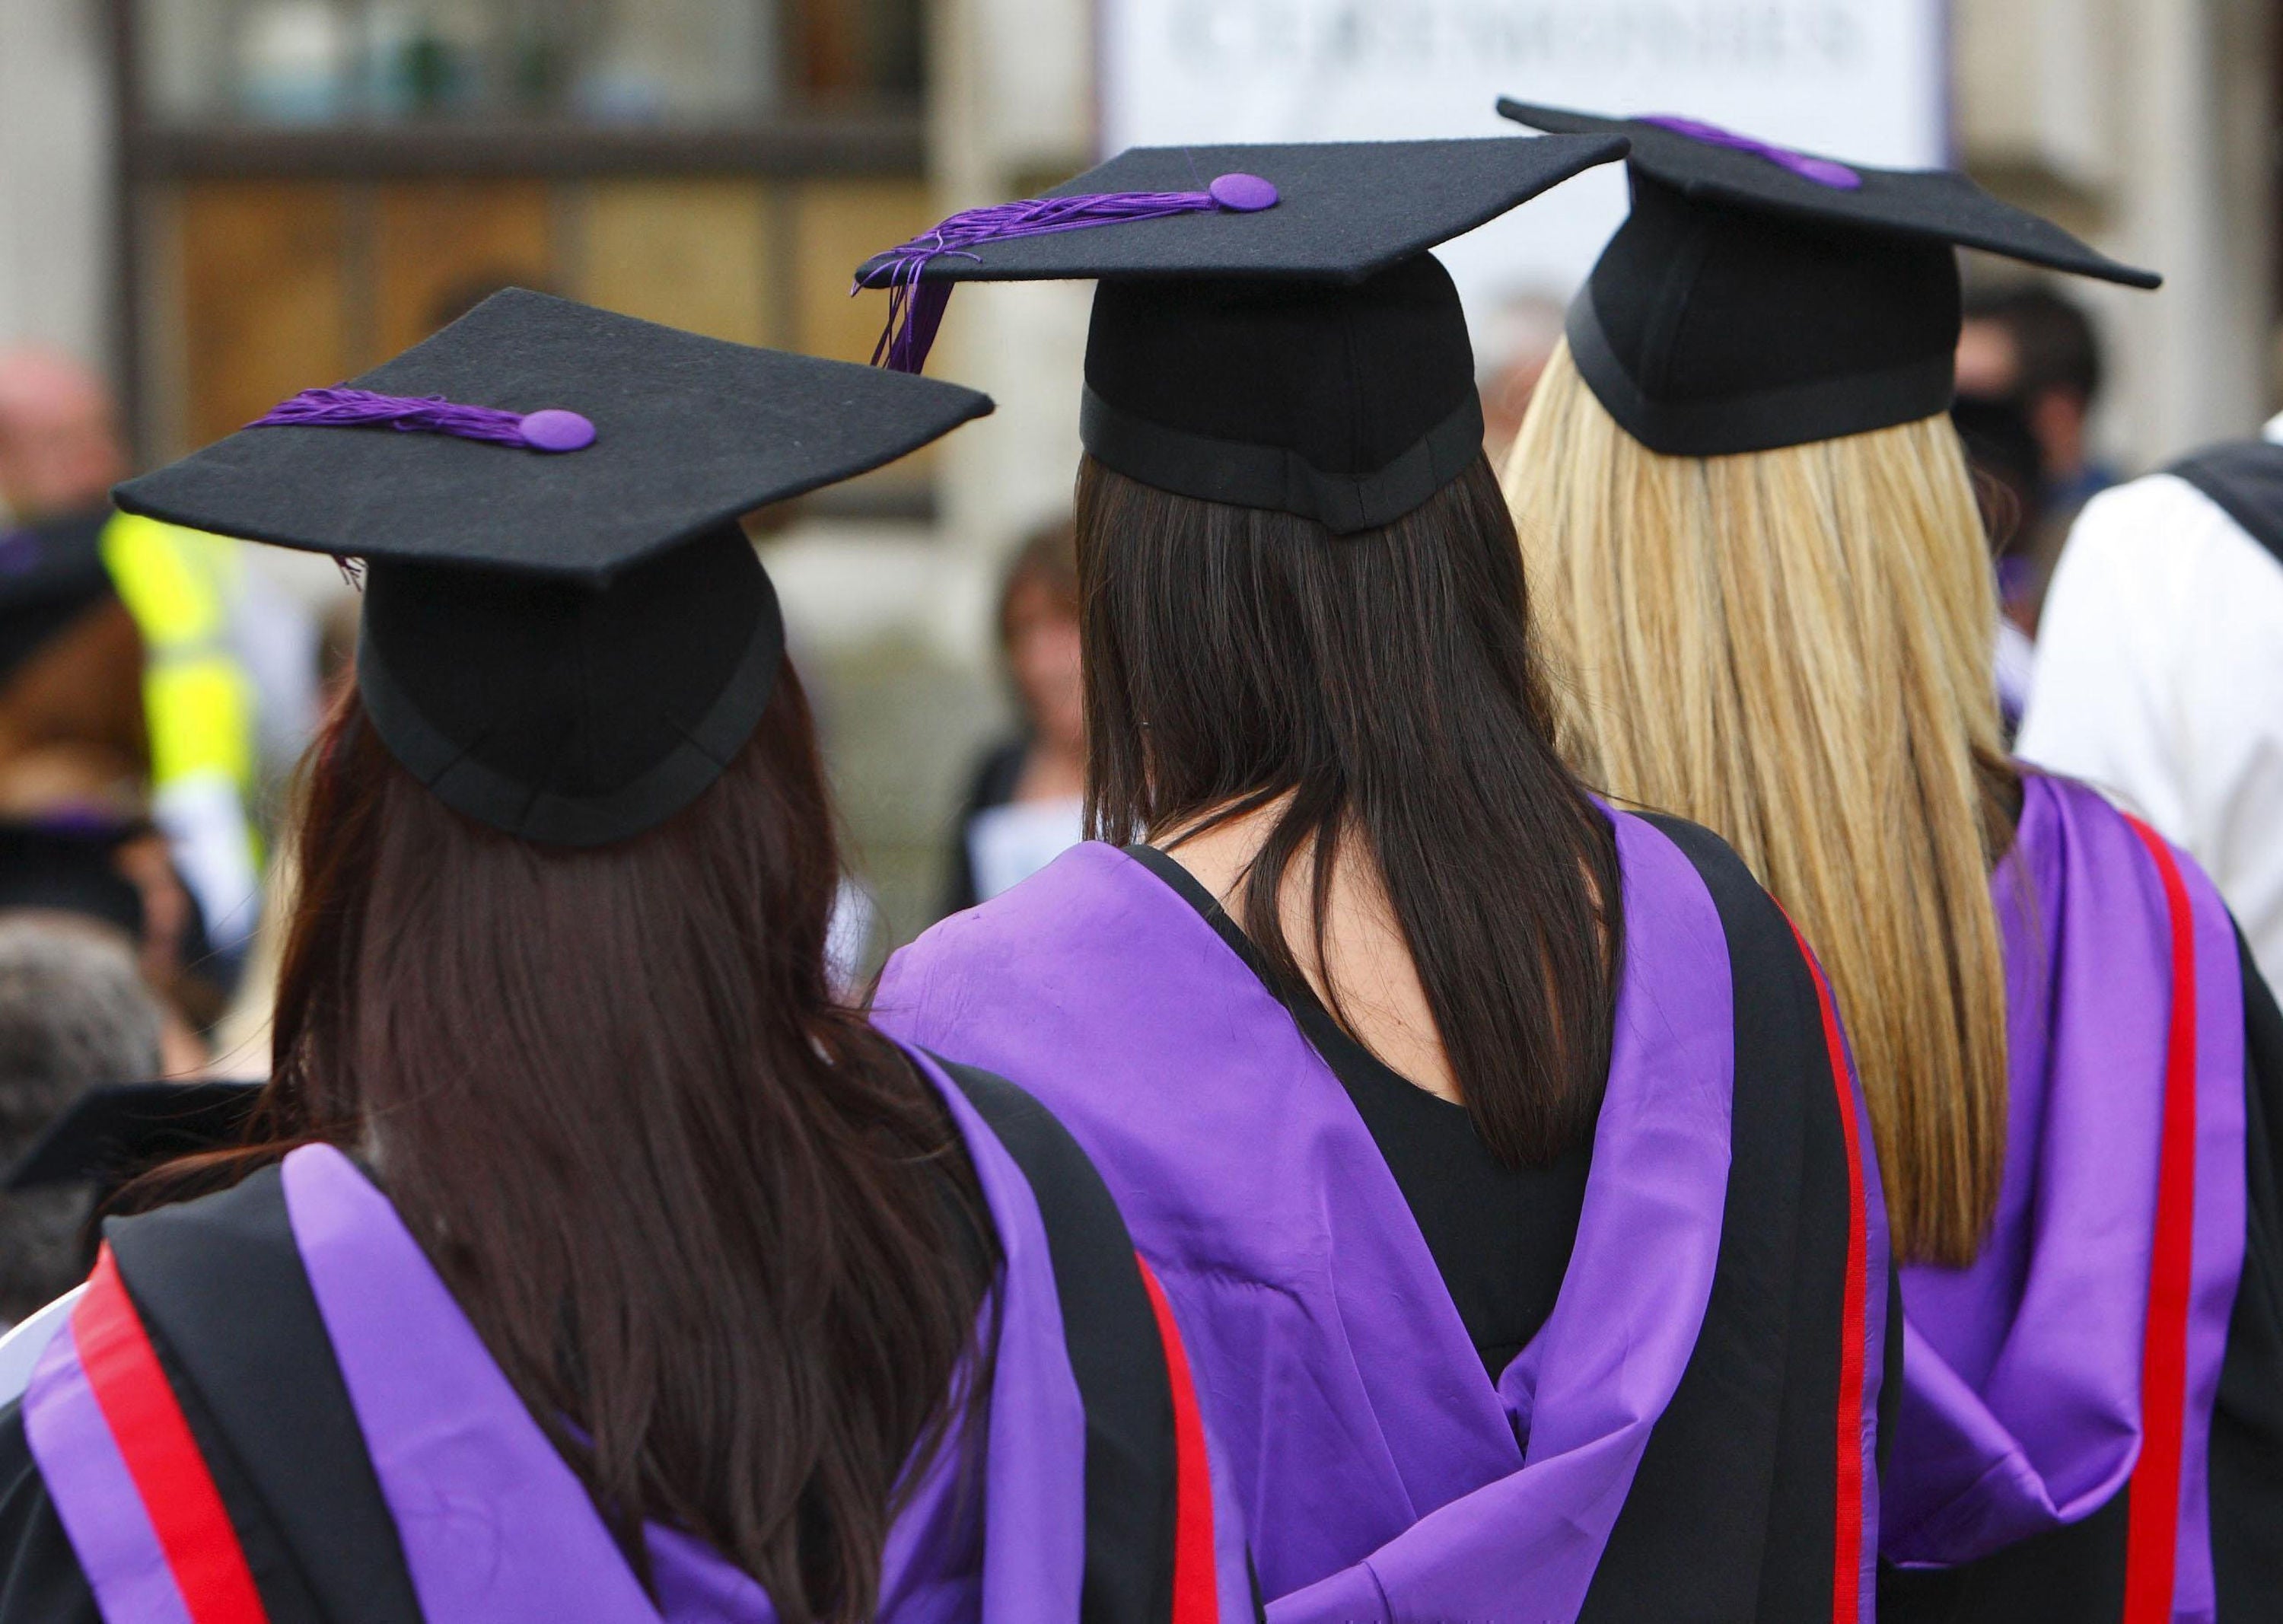 University graduates now expect higher salaries than they did earlier in the year, poll finds